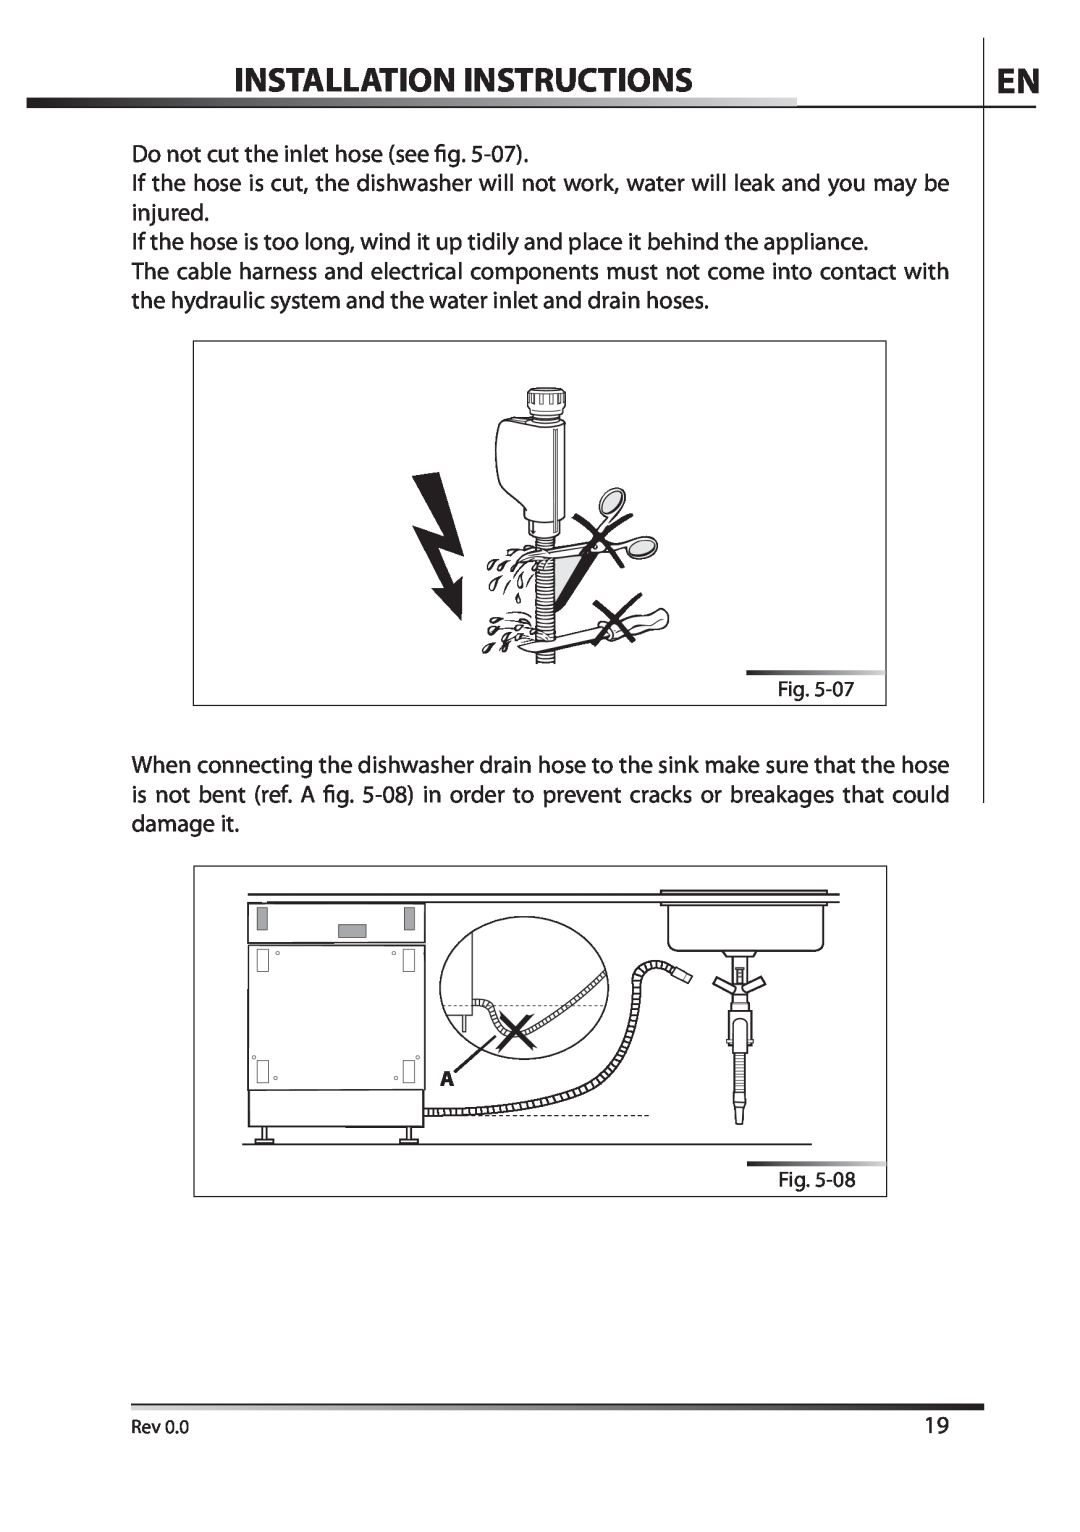 AEG F89078VI-M user manual Installation Instructions, Do not cut the inlet hose see fig 